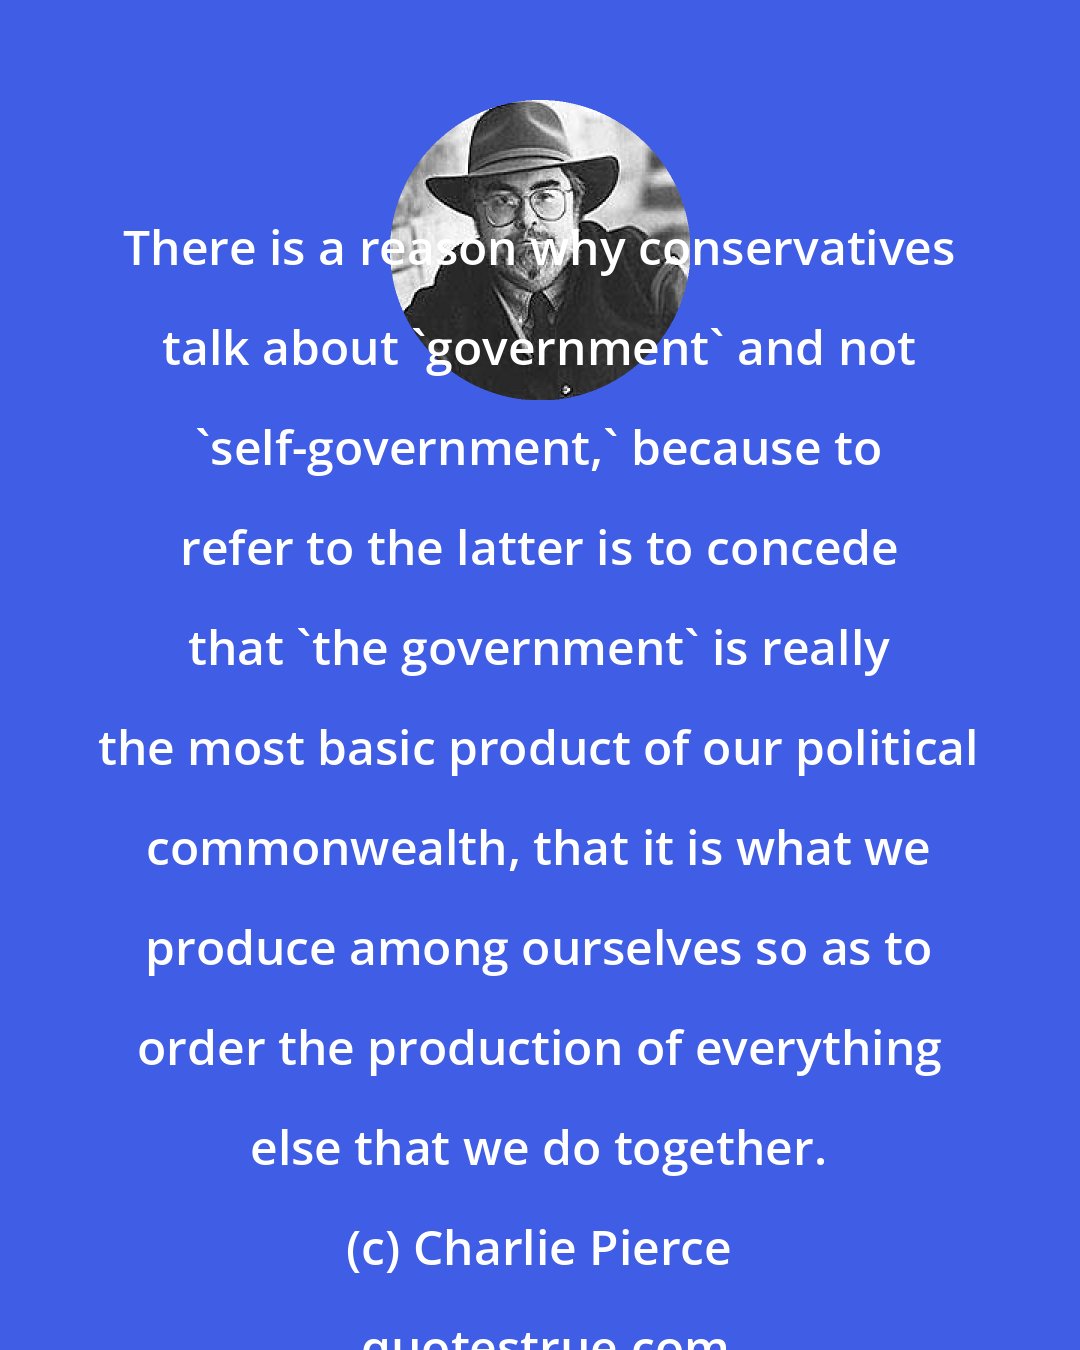 Charlie Pierce: There is a reason why conservatives talk about 'government' and not 'self-government,' because to refer to the latter is to concede that 'the government' is really the most basic product of our political commonwealth, that it is what we produce among ourselves so as to order the production of everything else that we do together.